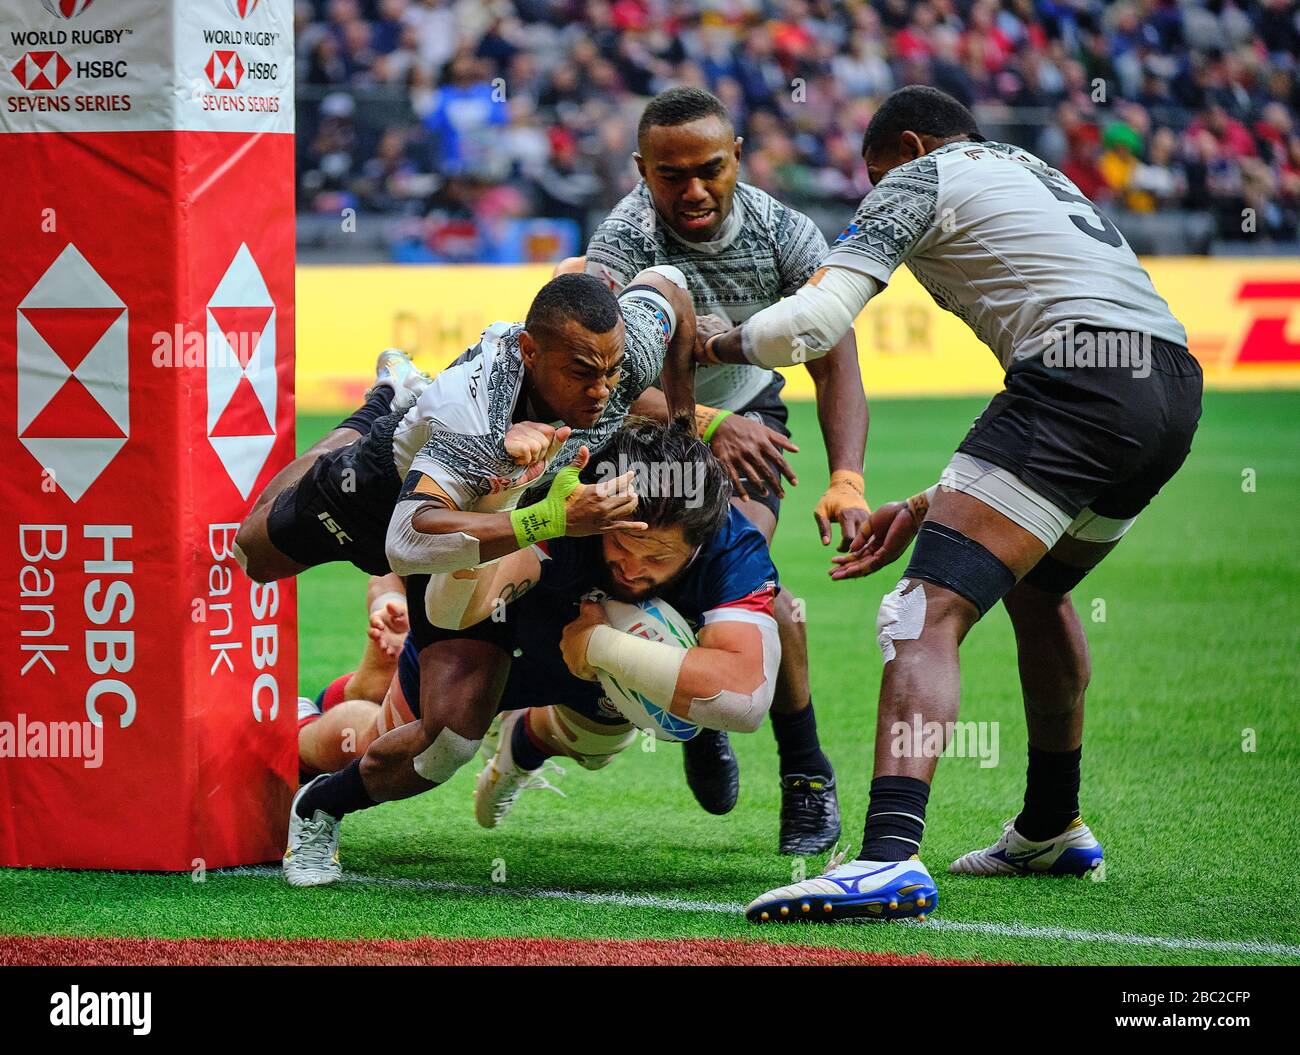 Vancouver, Canada. 8th March, 2020. Danny Barrett #3 (centre) of the USA tackled by Waisea Nacuqu #8 (right) and Alasio Naduva #10 (left) of Fiji in M Stock Photo